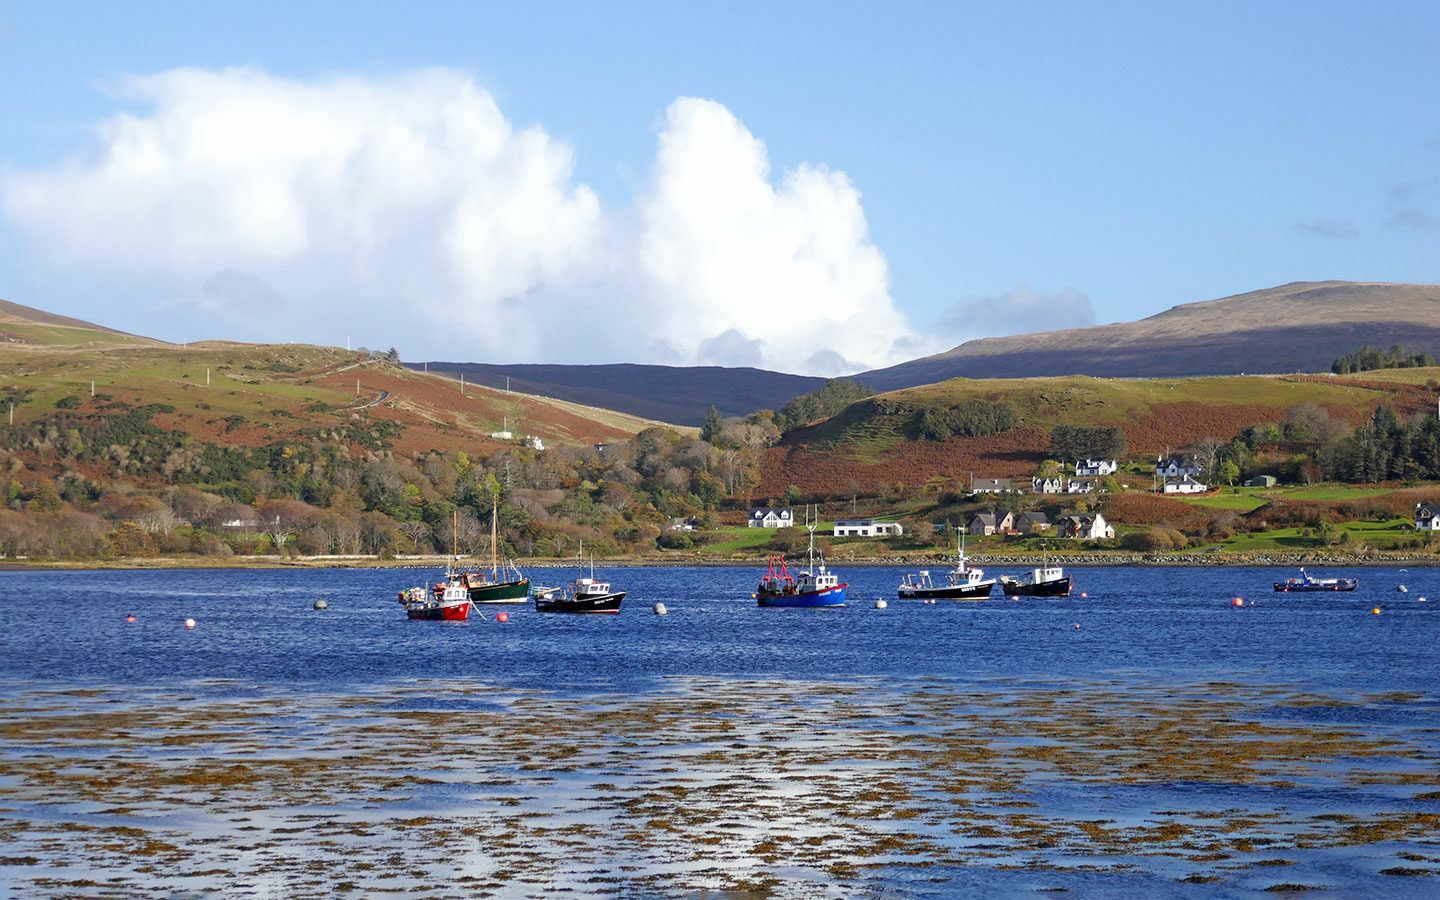 Boats in the harbour in Uig on the Isle of Skye